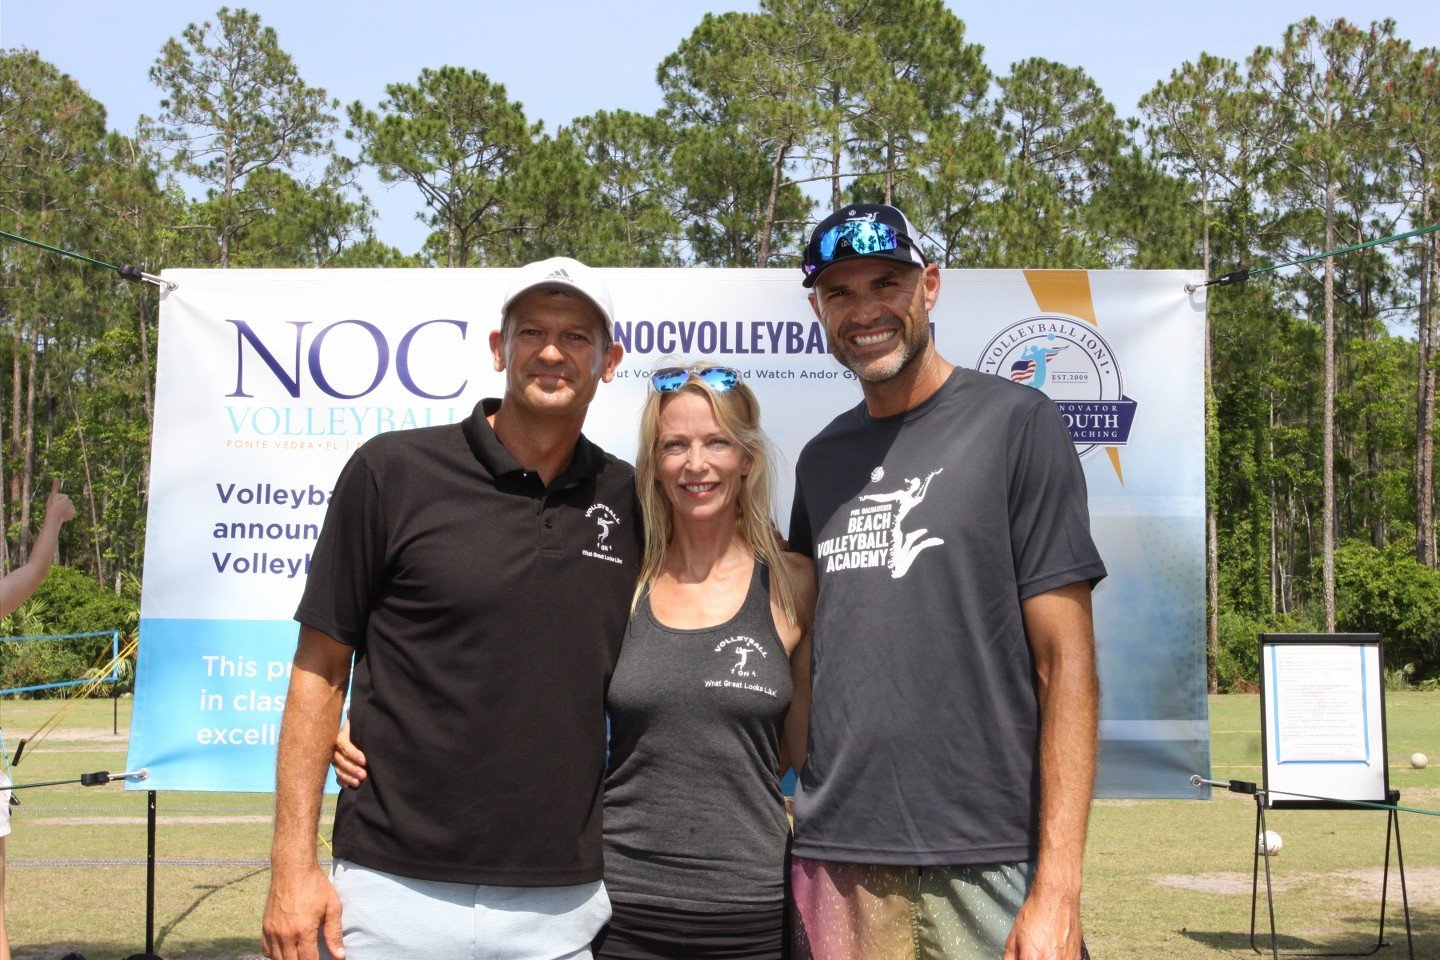 Olympic gold medalist Phil Dalhausser was the guest during a recent youth volleyball class in Nocatee Community Park. Pictured from left are Volleyball1on1 co-founders Andor Gyulai and Vanessa Summers-Gyulai and Dalhausser.